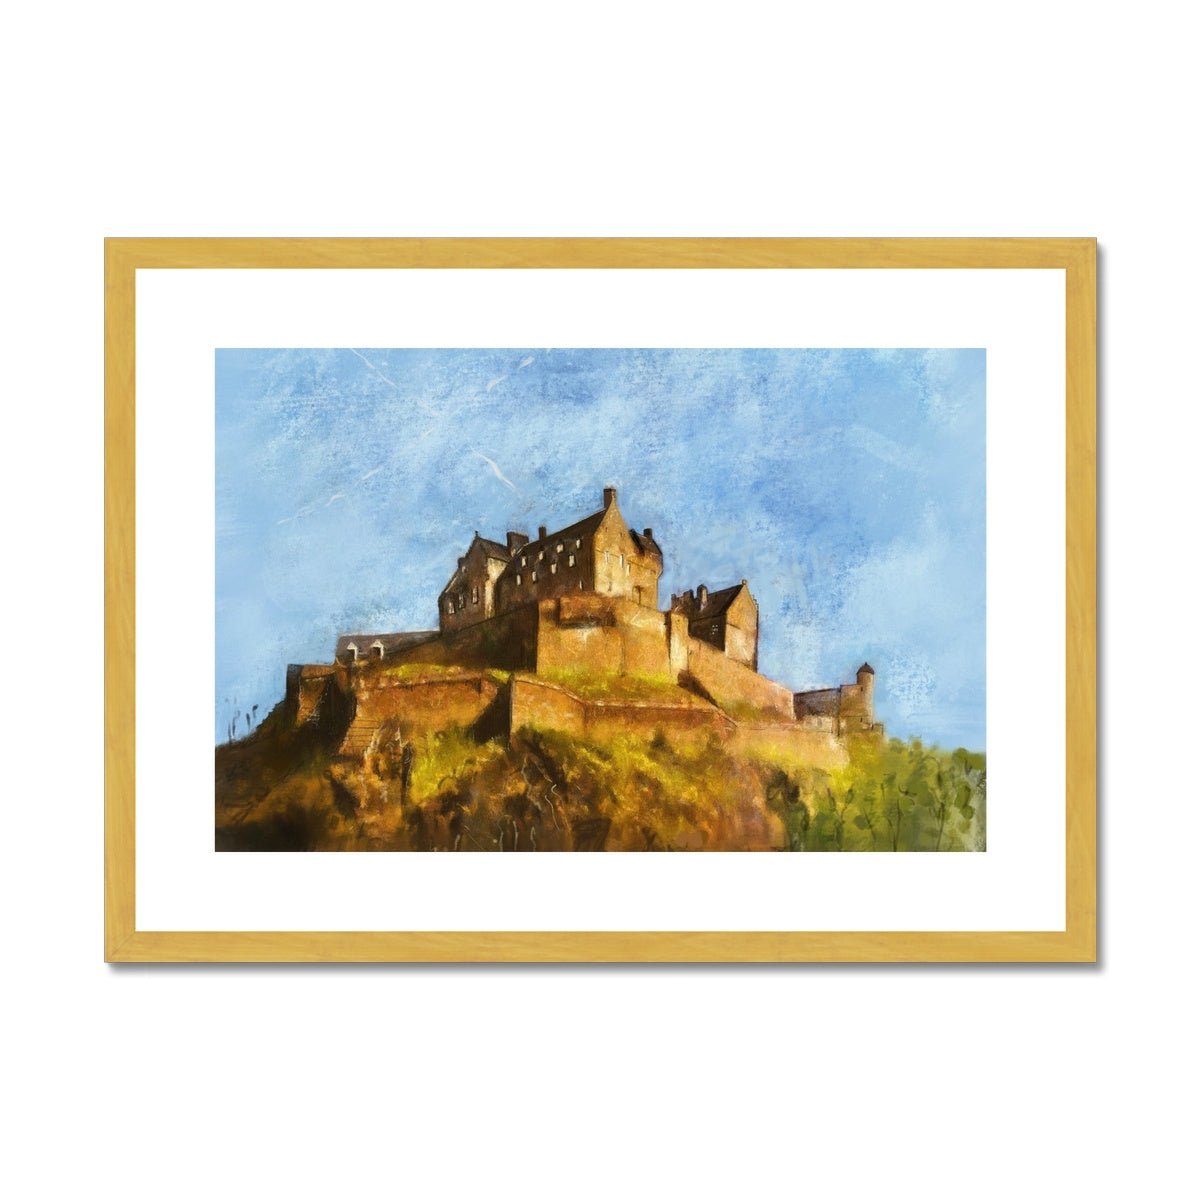 Edinburgh Castle Painting | Antique Framed & Mounted Prints From Scotland-Antique Framed & Mounted Prints-Historic & Iconic Scotland Art Gallery-A2 Landscape-Gold Frame-Paintings, Prints, Homeware, Art Gifts From Scotland By Scottish Artist Kevin Hunter